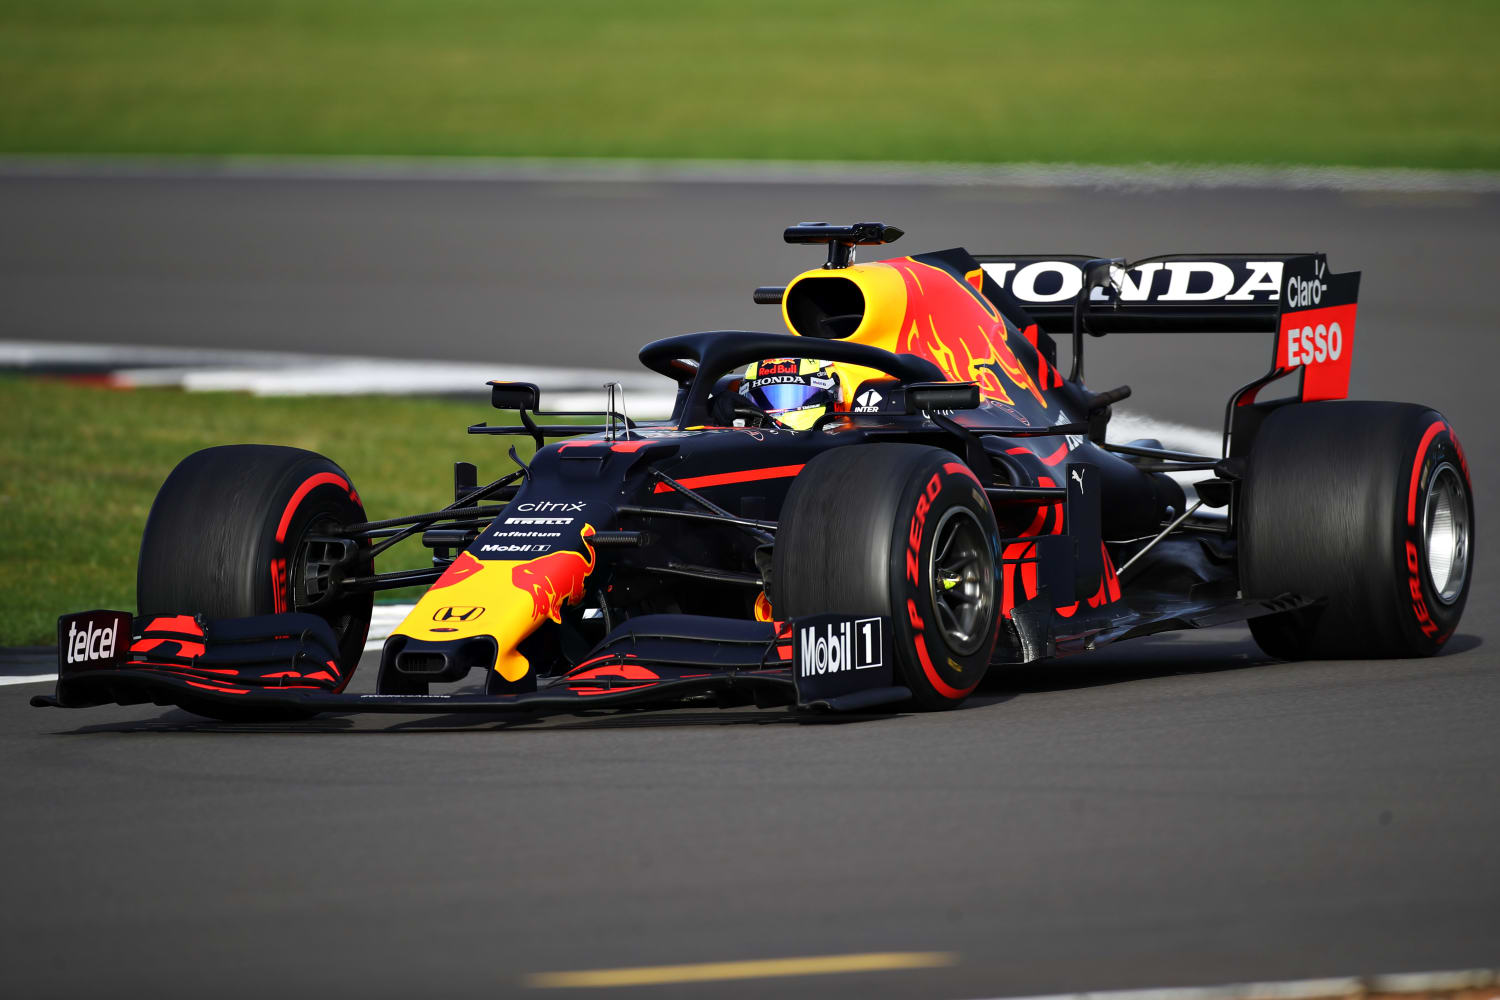 Sergio Perez's First Red Bull Racing Drive